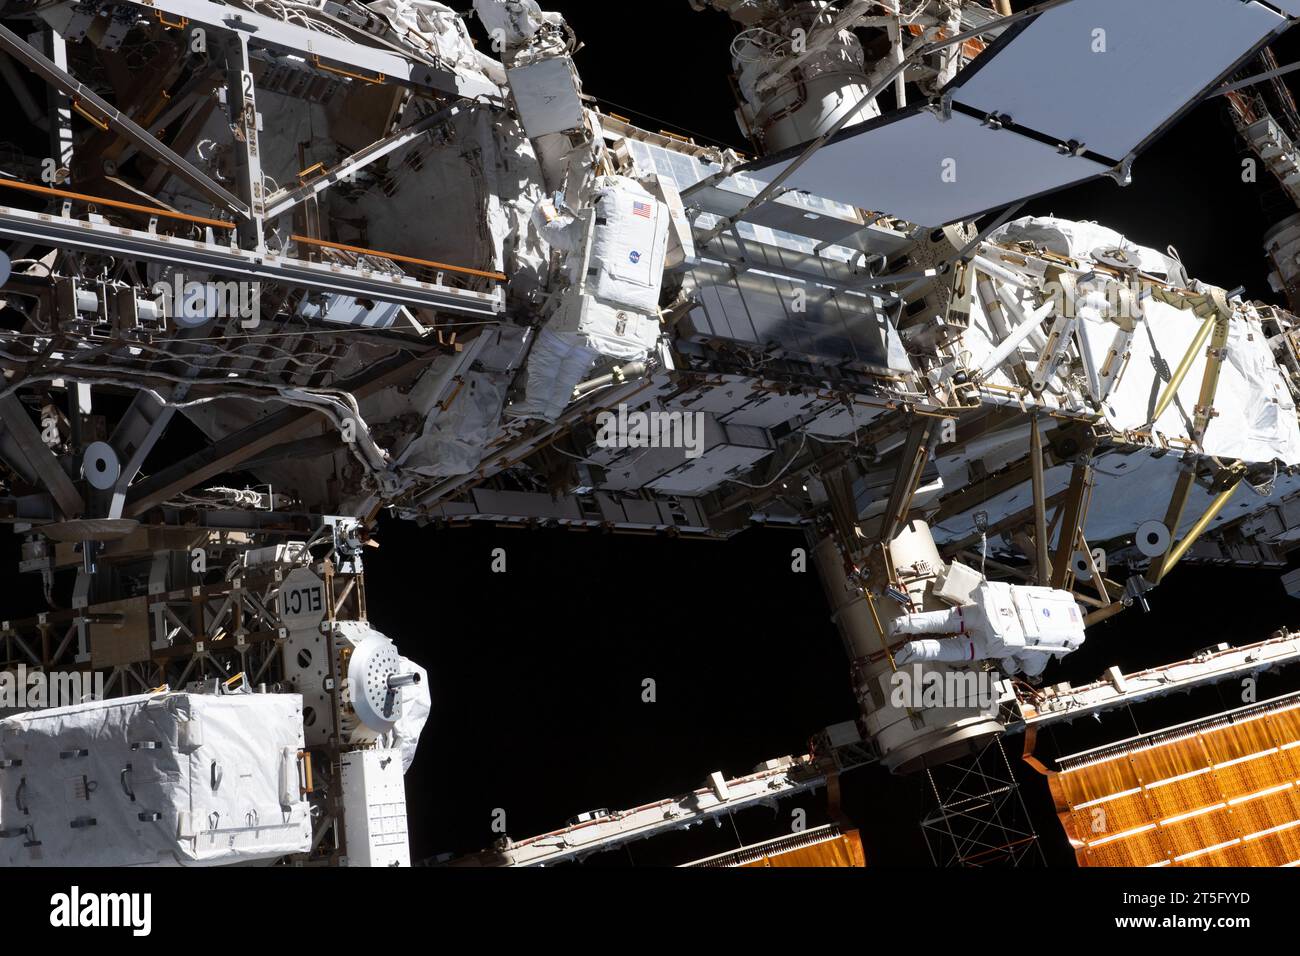 International Space Station, Earth Orbit. 01 November, 2023. NASA astronauts and Expedition 70 Flight Engineers Jasmin Moghbeli, bottom right, and Loral O'Hara, center, perform a spacewalk to replace one of the 12 trundle bearing assemblies on the port solar alpha rotary joint, outside the International Space Station, November 1, 2023 in Earth Orbit. The assembly allows the solar arrays to track the Sun and generate electricity to power the orbiting laboratory. Credit: NASA Astronaut/NASA/Alamy Live News Stock Photo